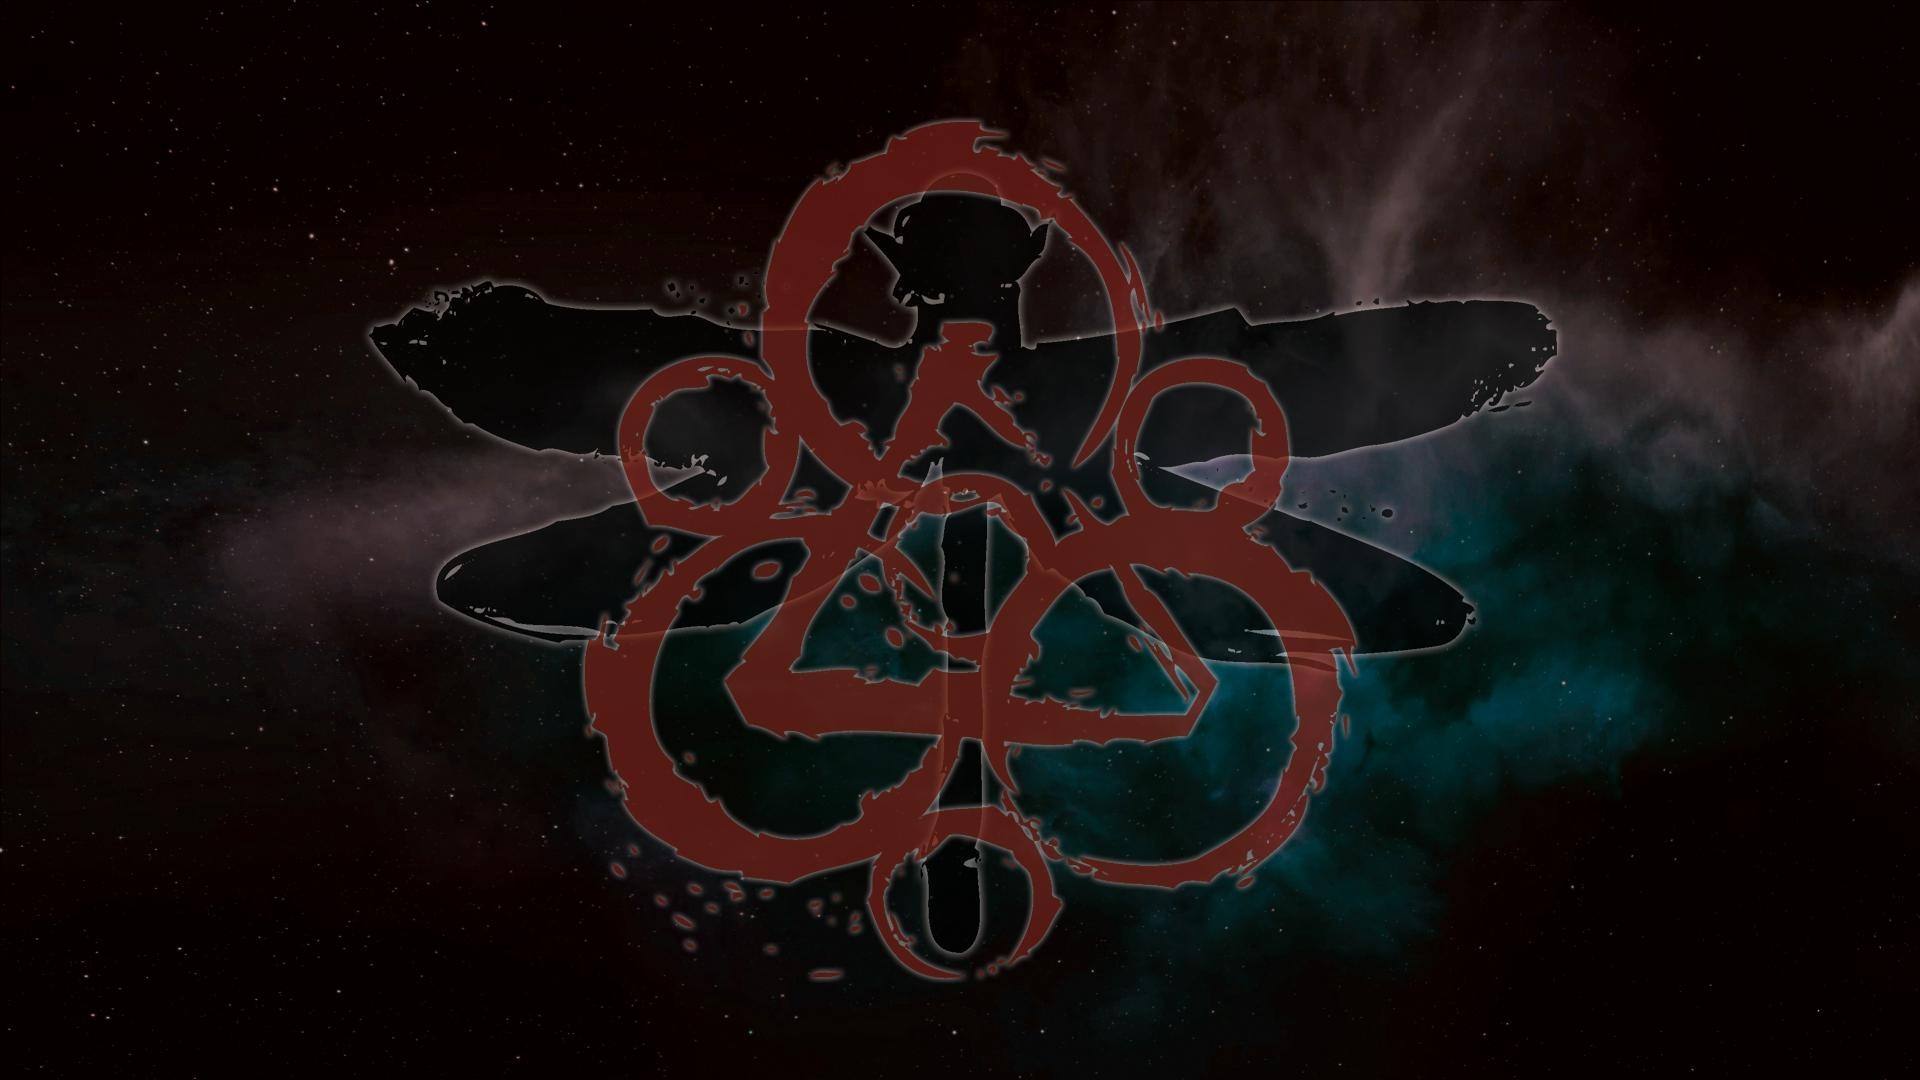 Coheed and Cambria, Band wallpapers, Music visuals, Band's name, 1920x1080 Full HD Desktop